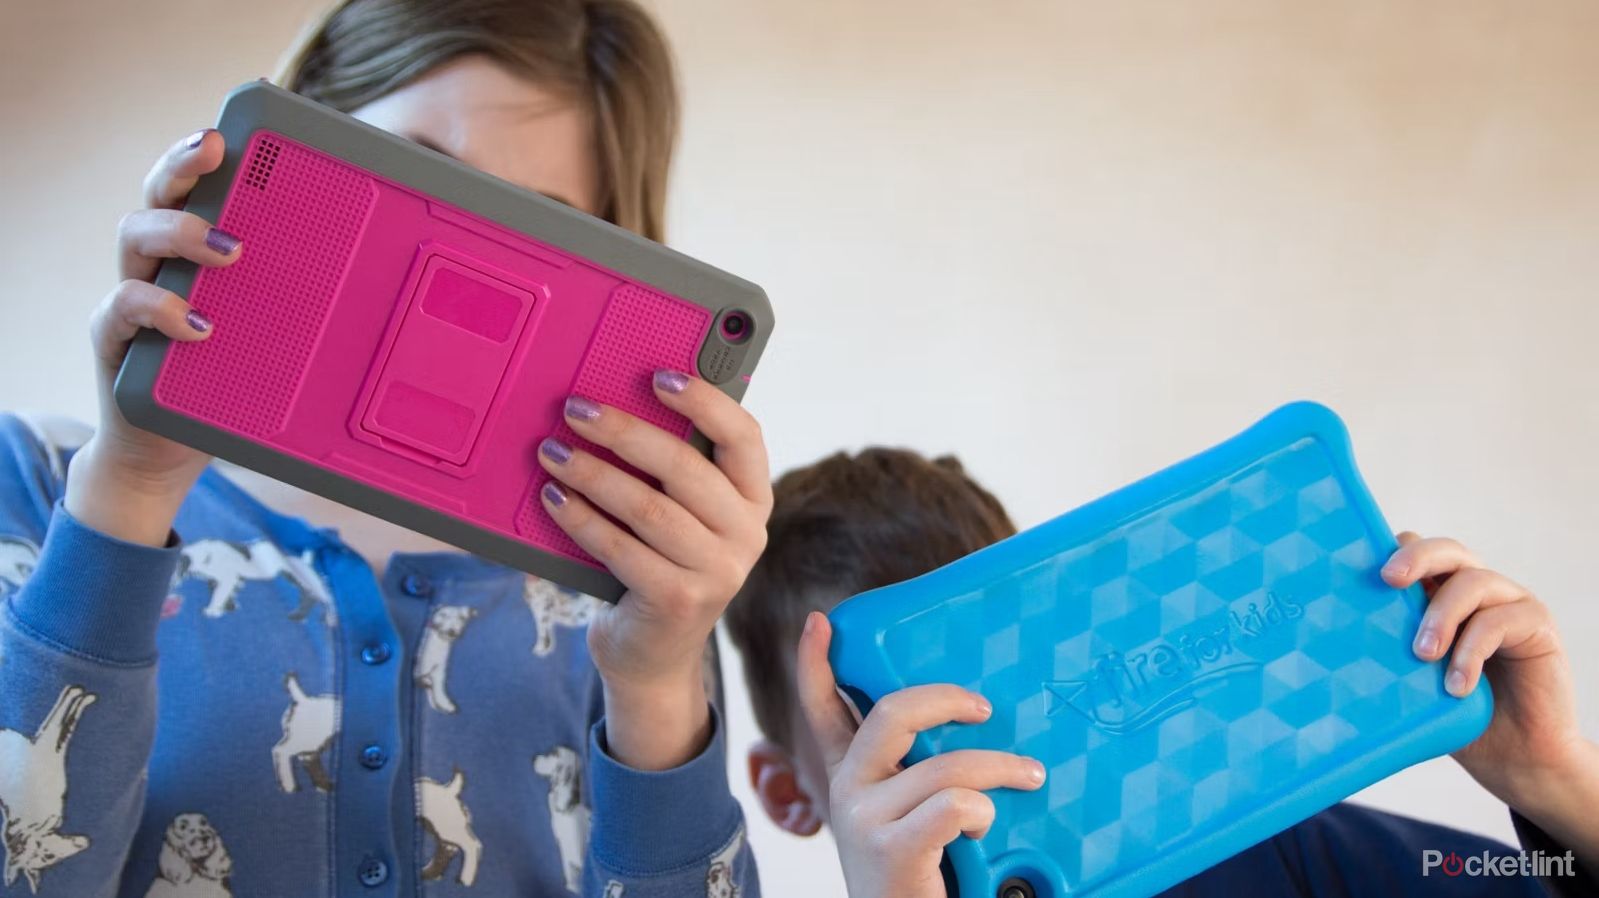 amazon fire tablet for kids